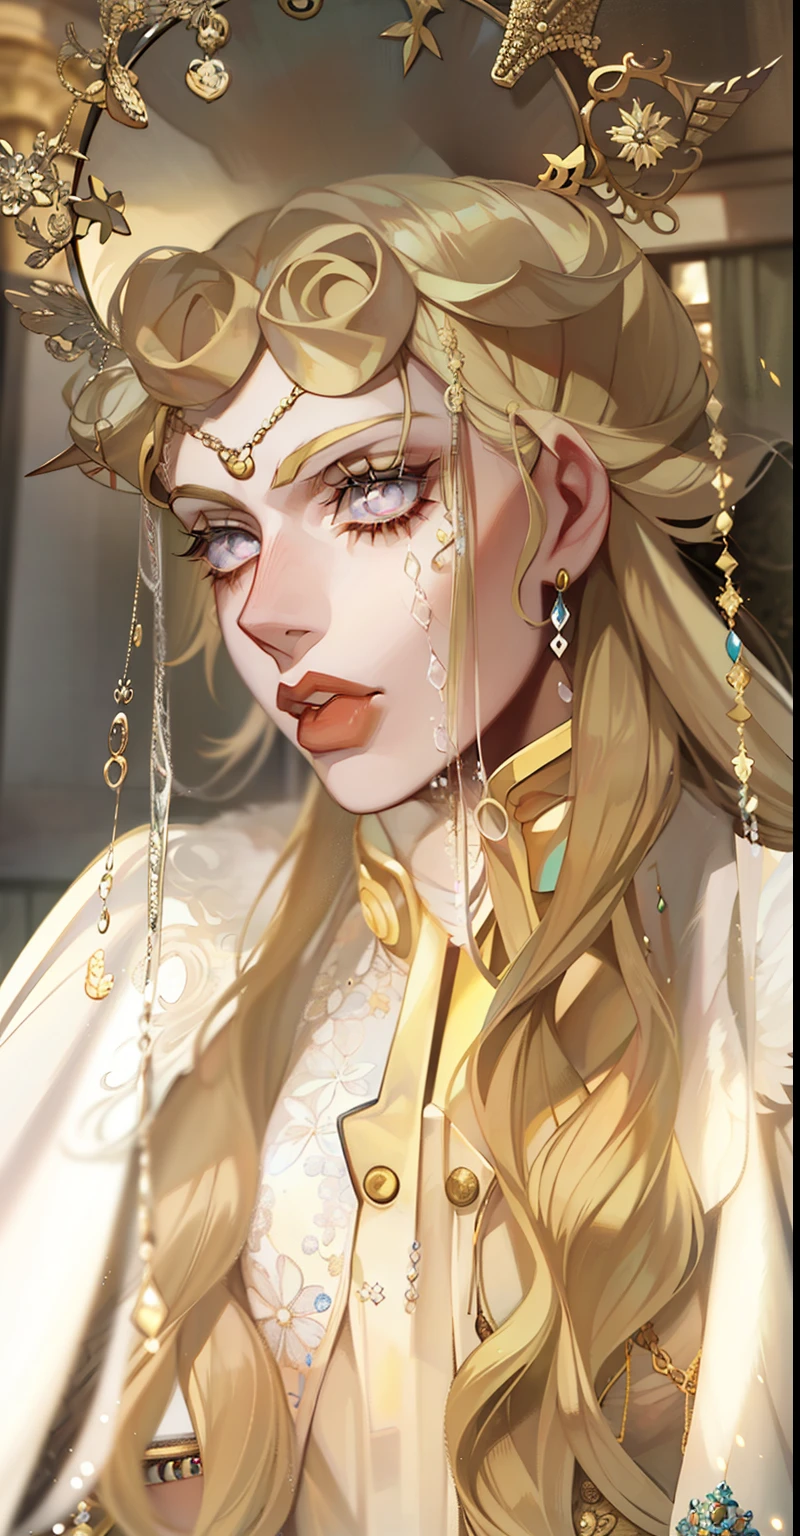 a close up of a female Giorno Giovanna from JoJos Bizzare Adventure with a halo/angelic crown on her head, porcelain pale skin, pale porcelain white skin, fairycore, Jojos bizzare adventure, anime, manga, angelic